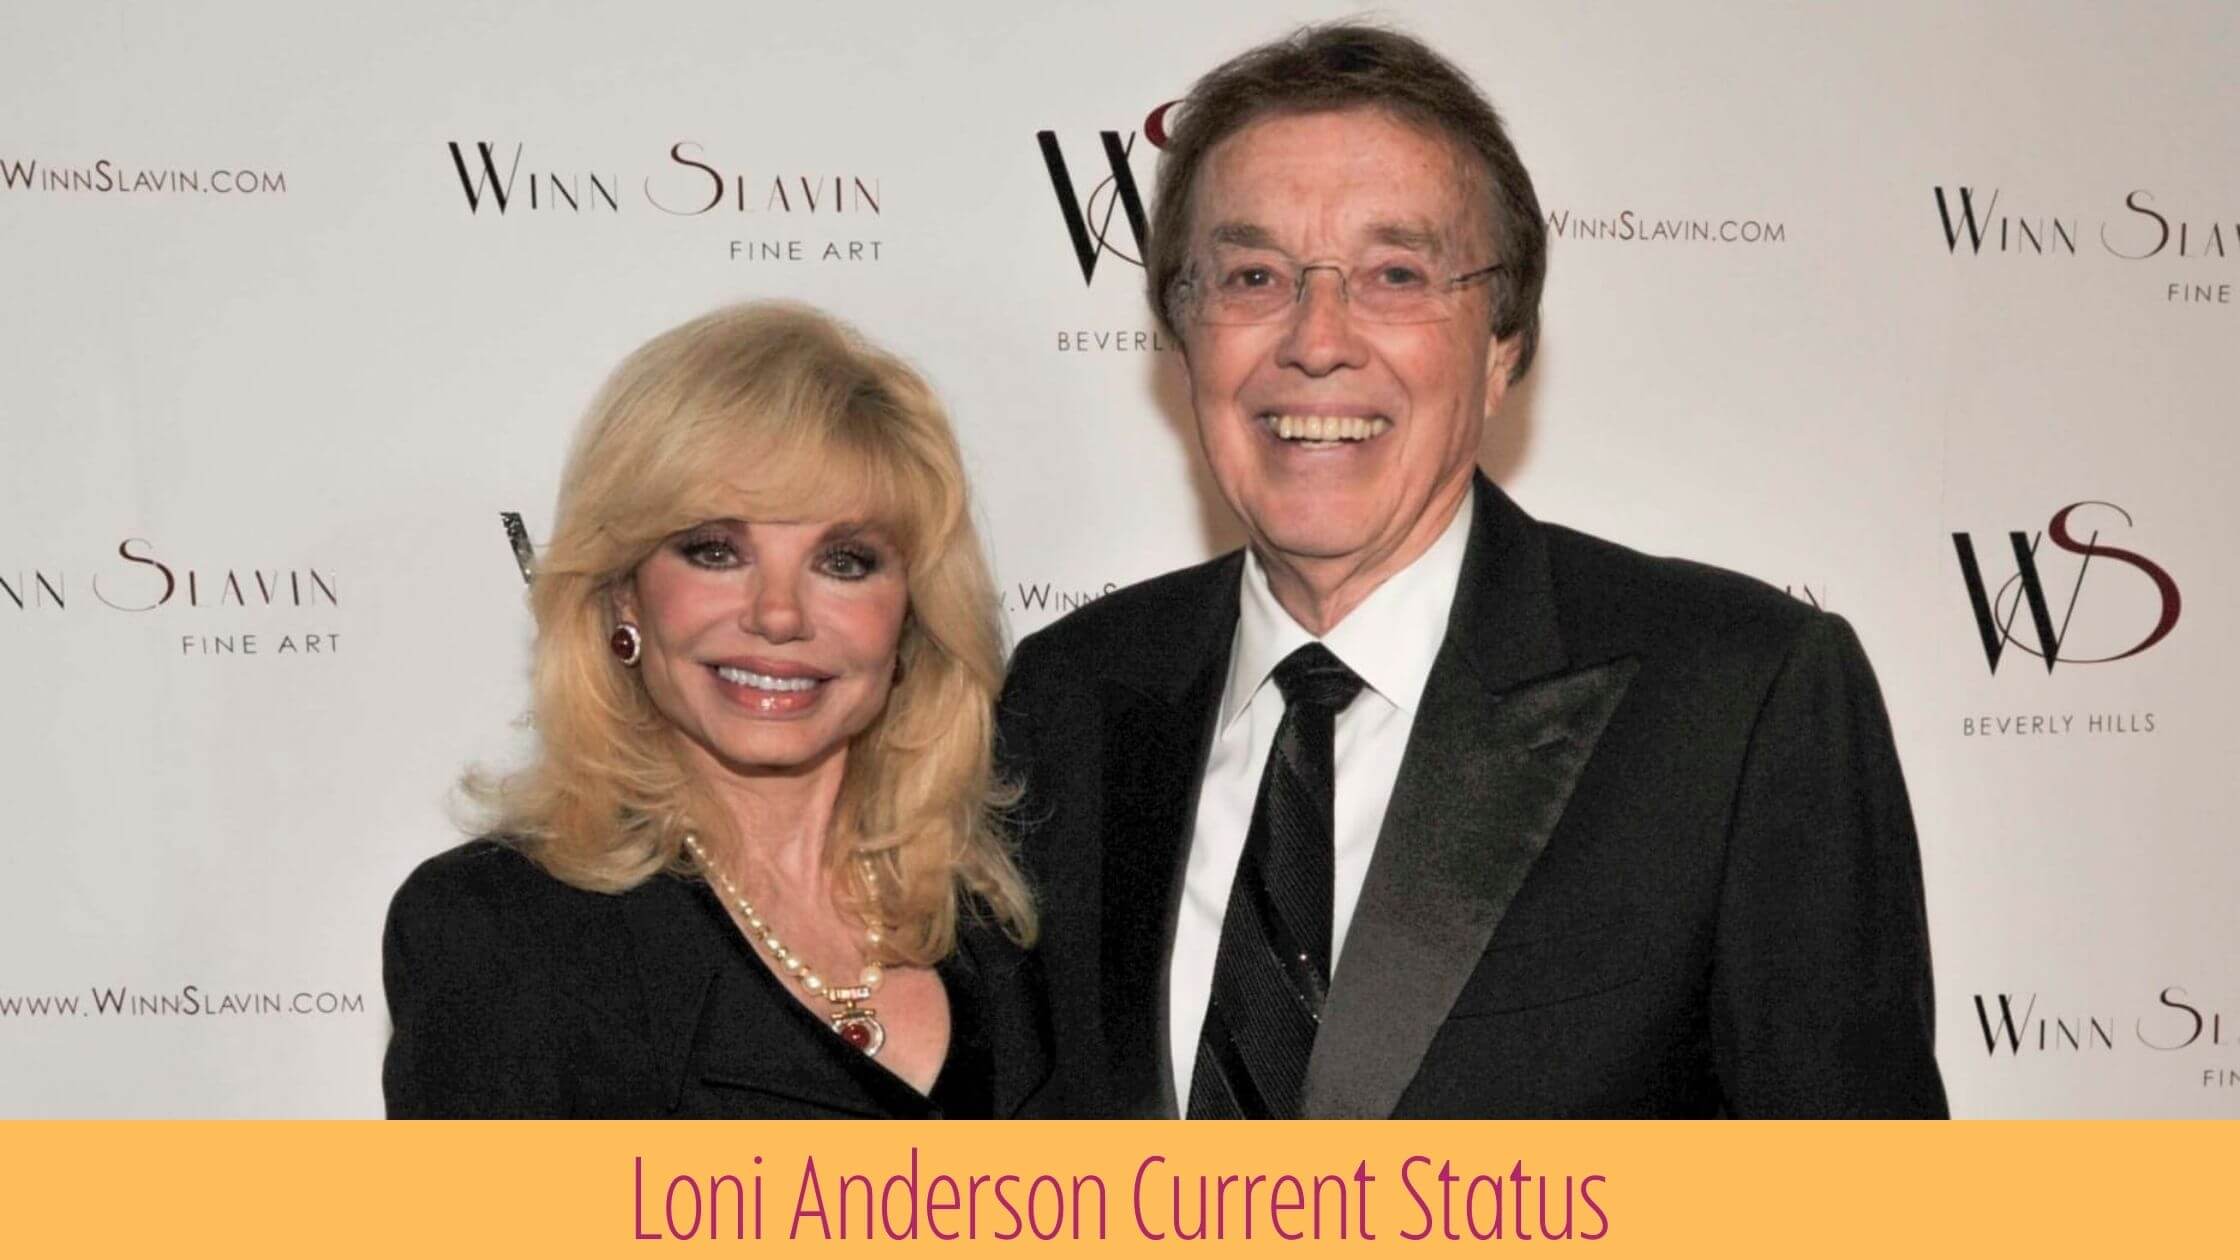 Loni Anderson’s Personal Life